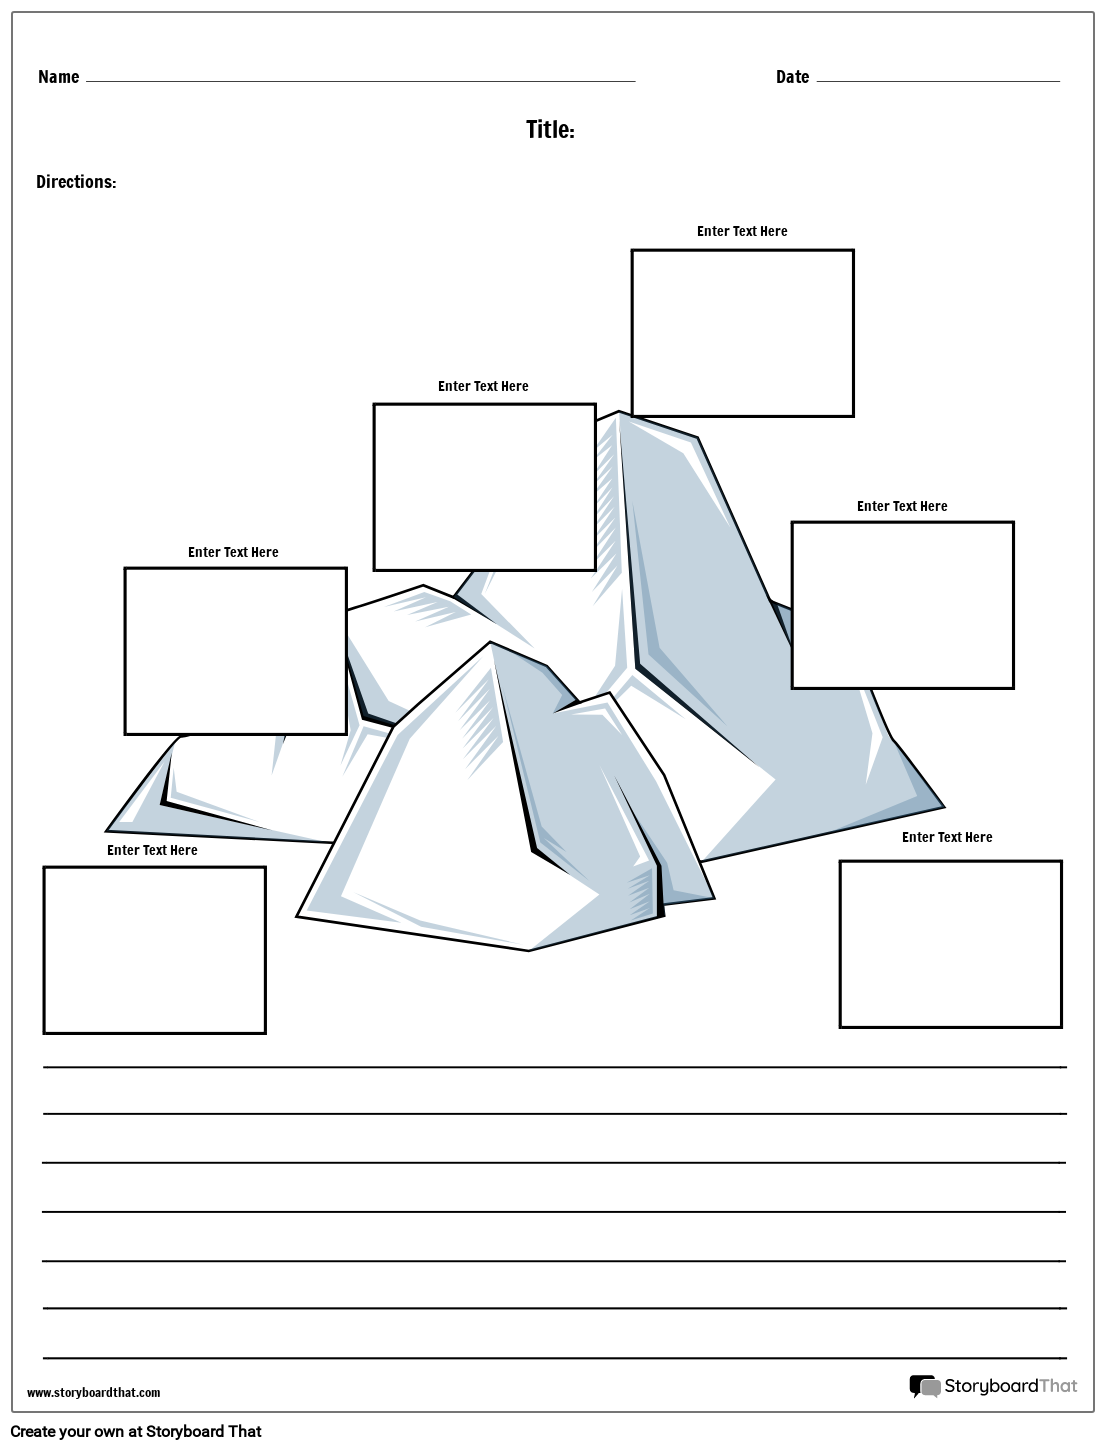 Plot Iceberg With Paragraph Storyboard By Worksheet